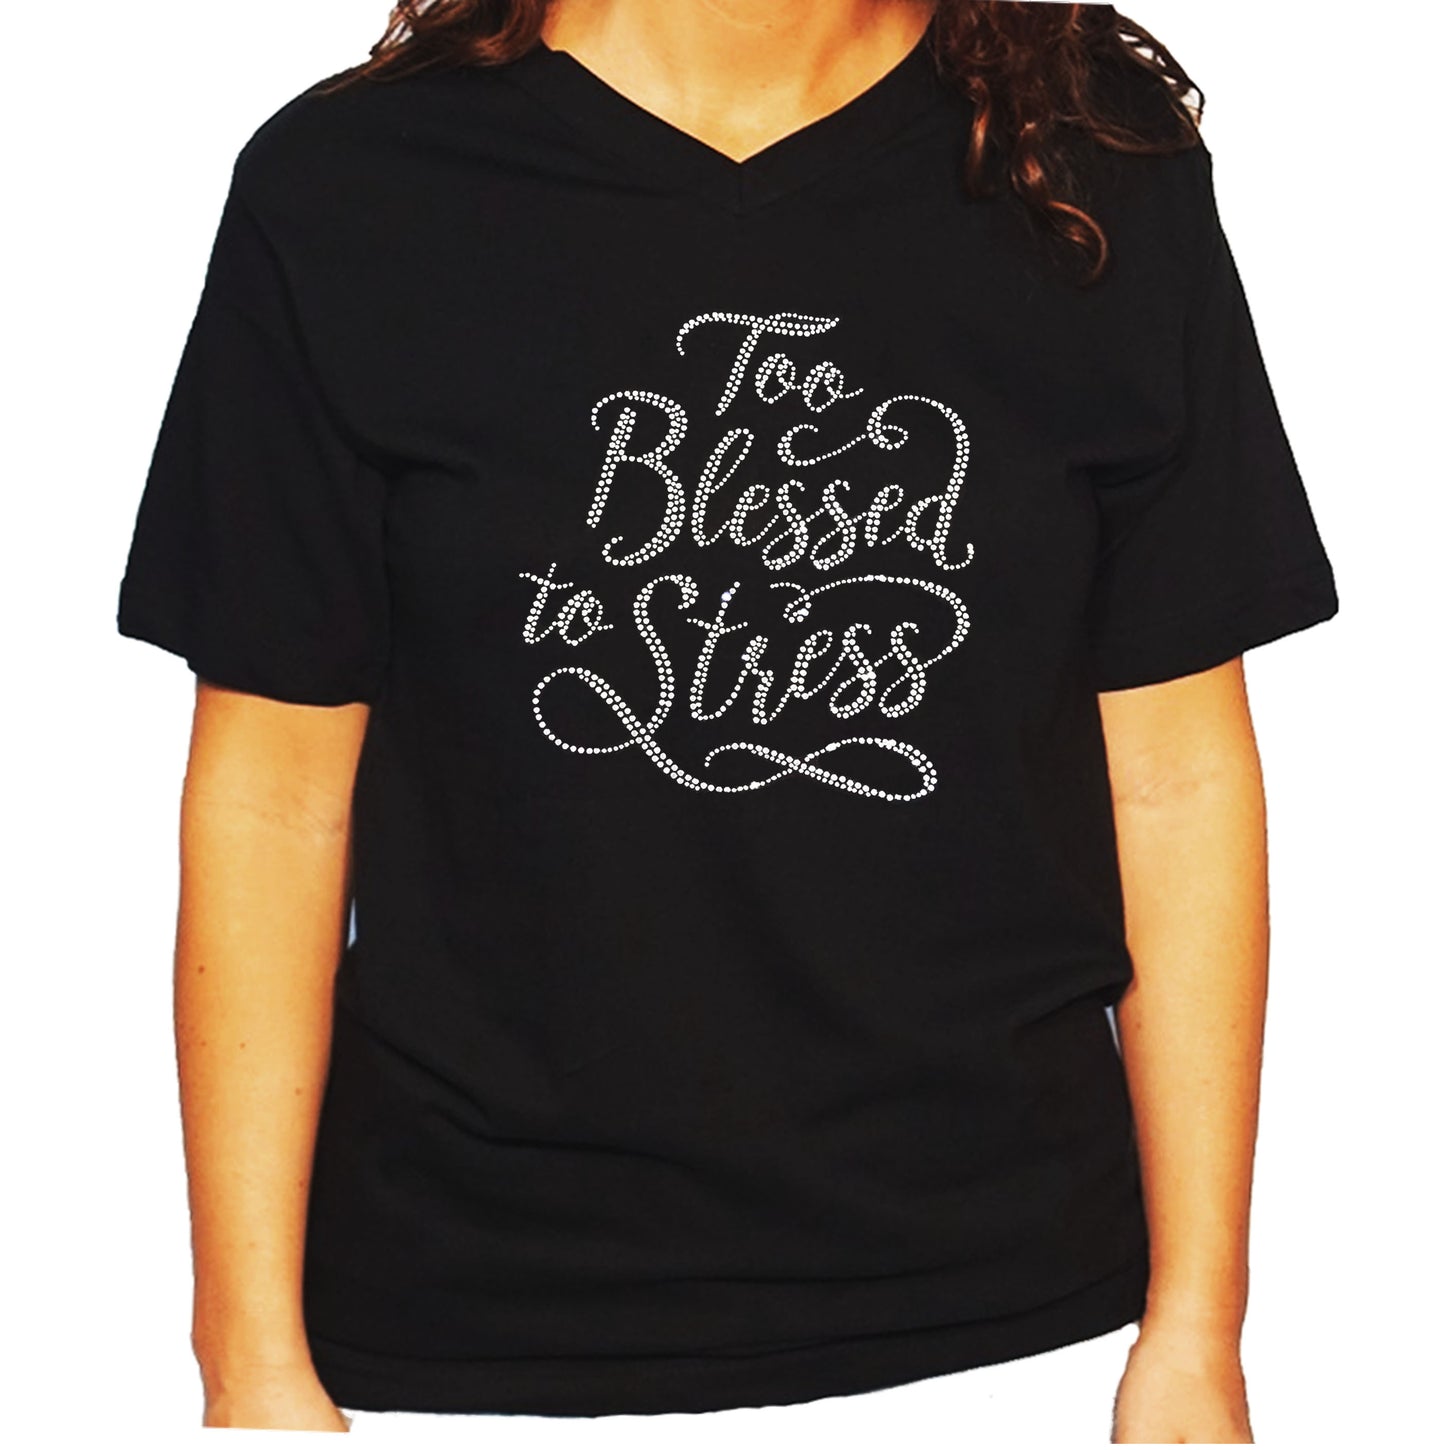 Women's / Unisex T-Shirt with Too Blessed to Stress in Rhinestones